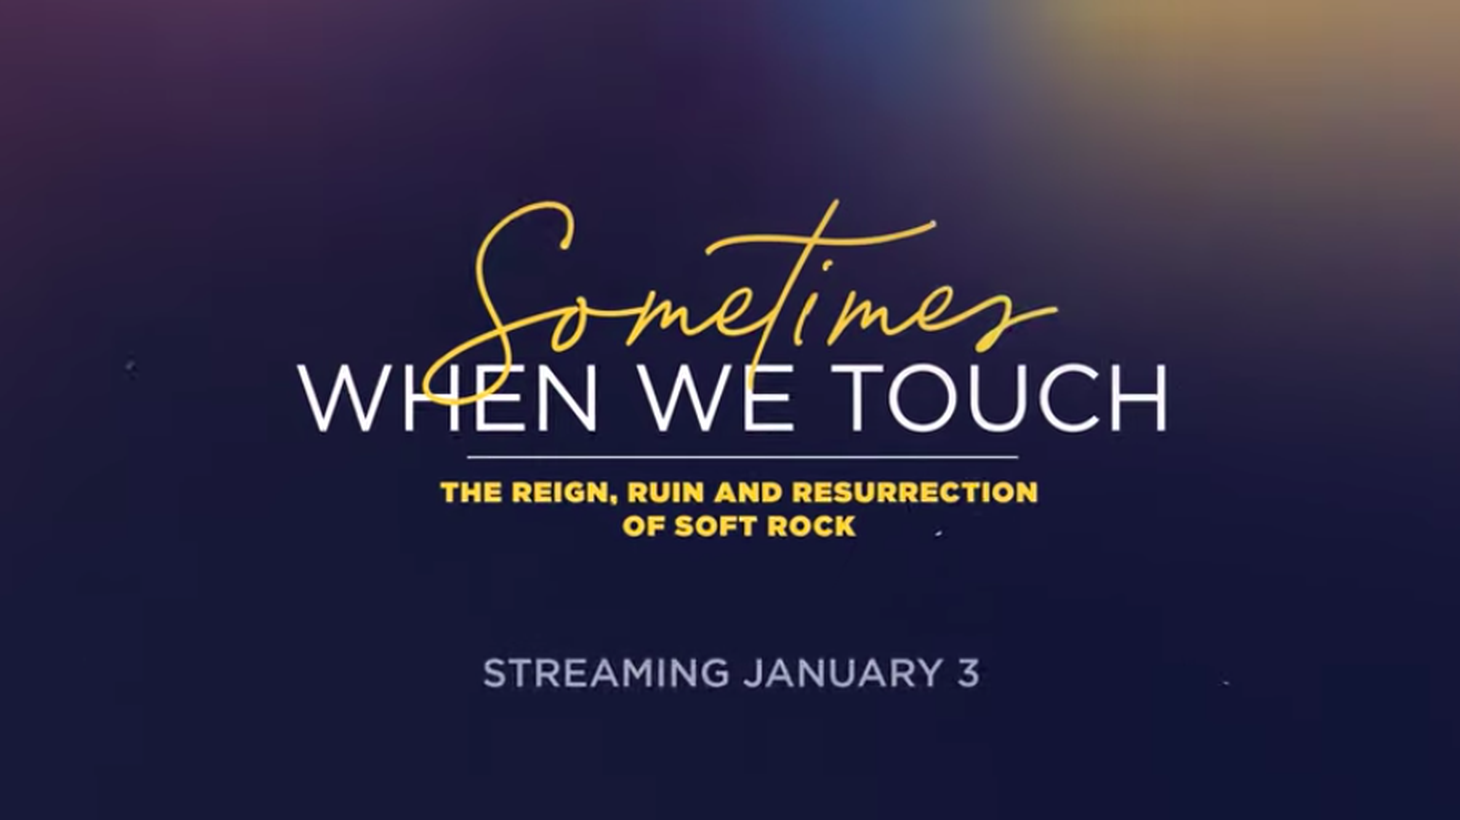 The three-part documentary “Sometimes When We Touch” explores the rise of soft rock and its influence on today’s music.